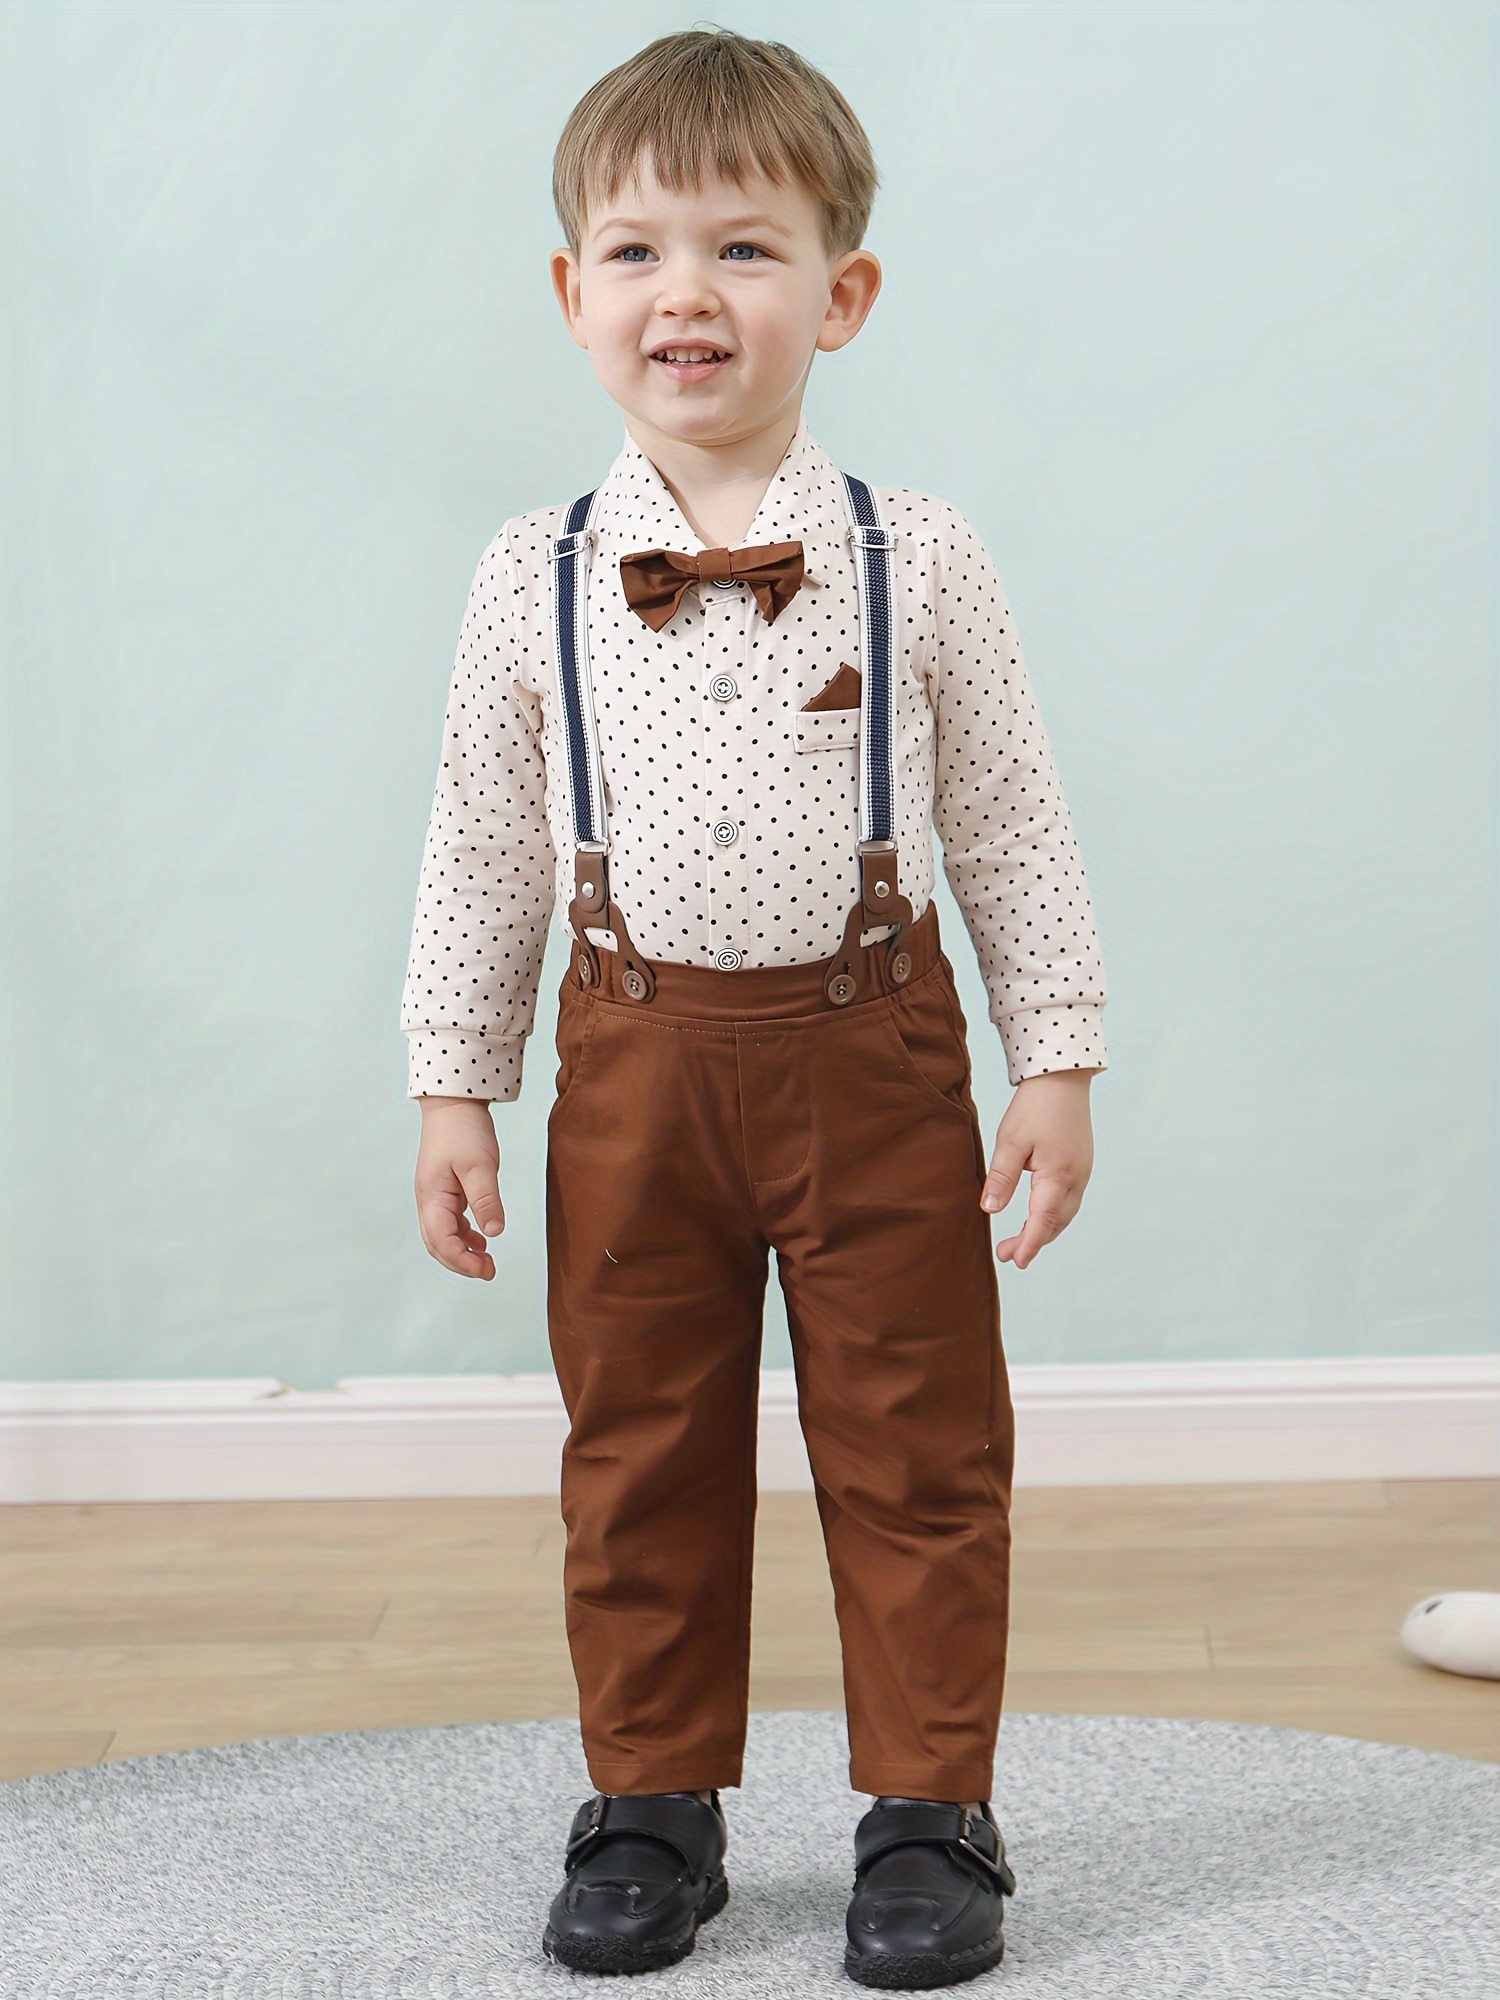 Formal Outfit, Gentleman Outfit First Birthday, Wedding, Boys Clothing,  Boys Formal Wear, Special Occasion, Best Man Outfit